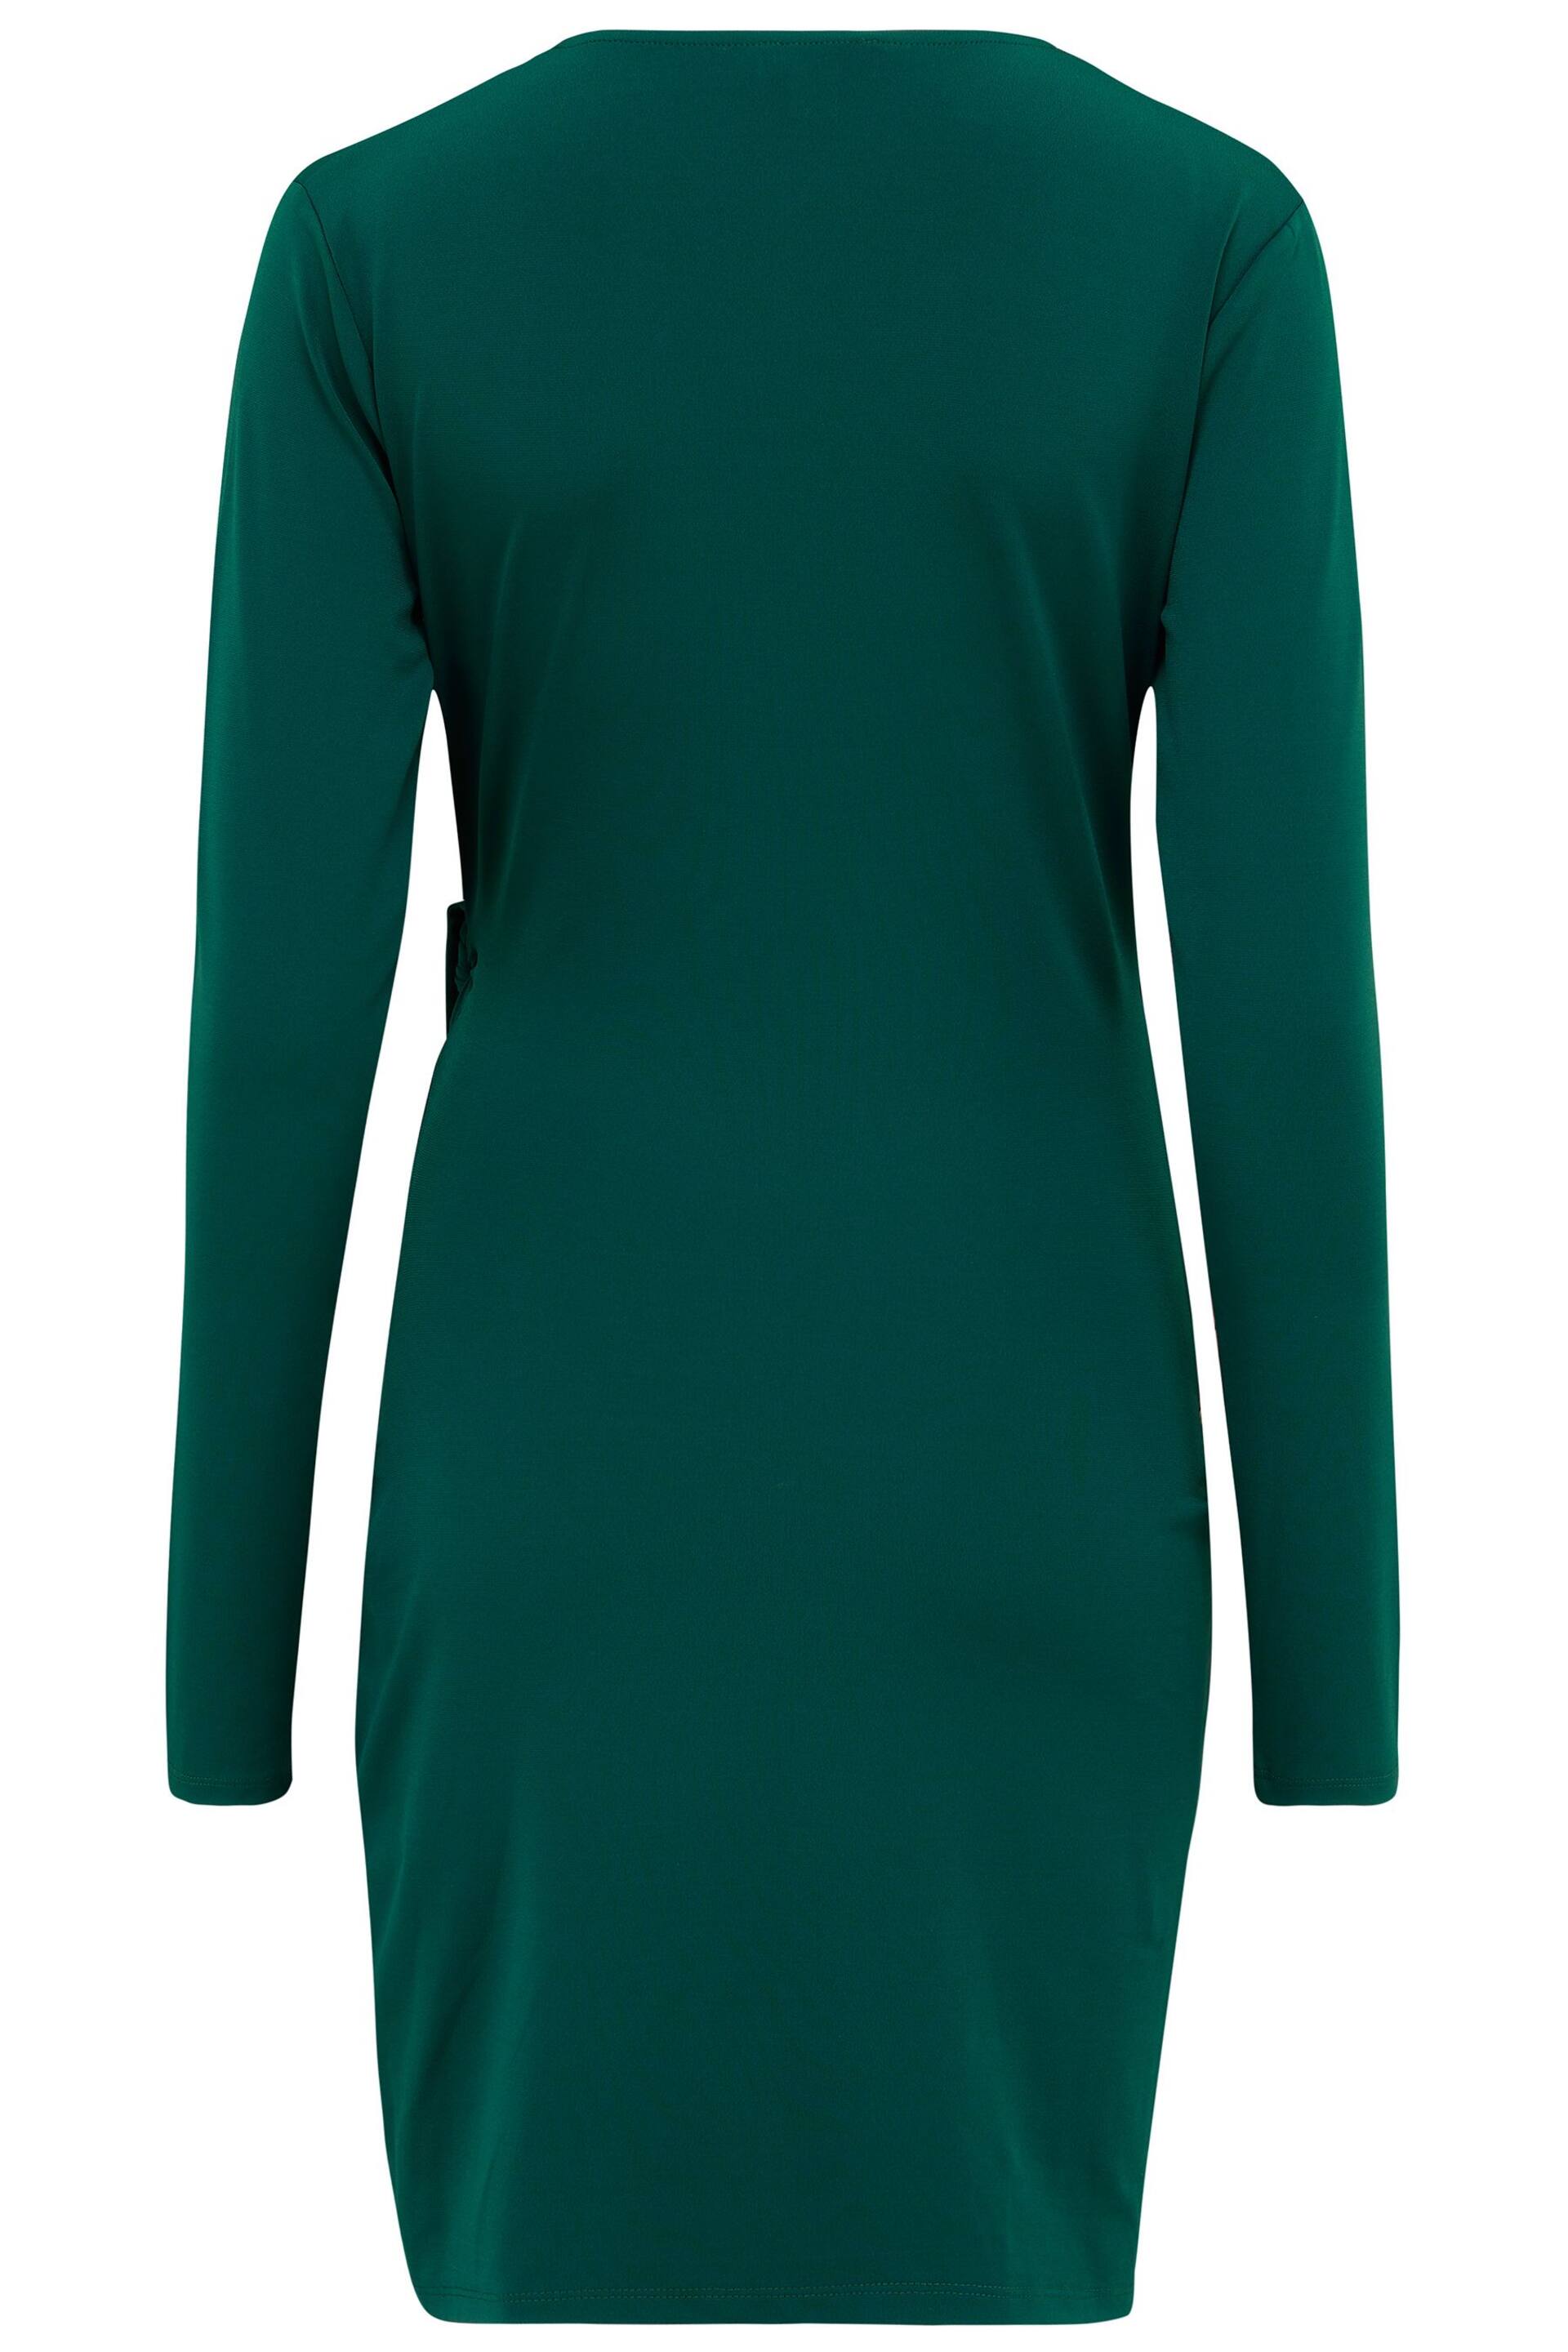 Pour Moi Green Bryony Slinky Dress - Image 5 of 5